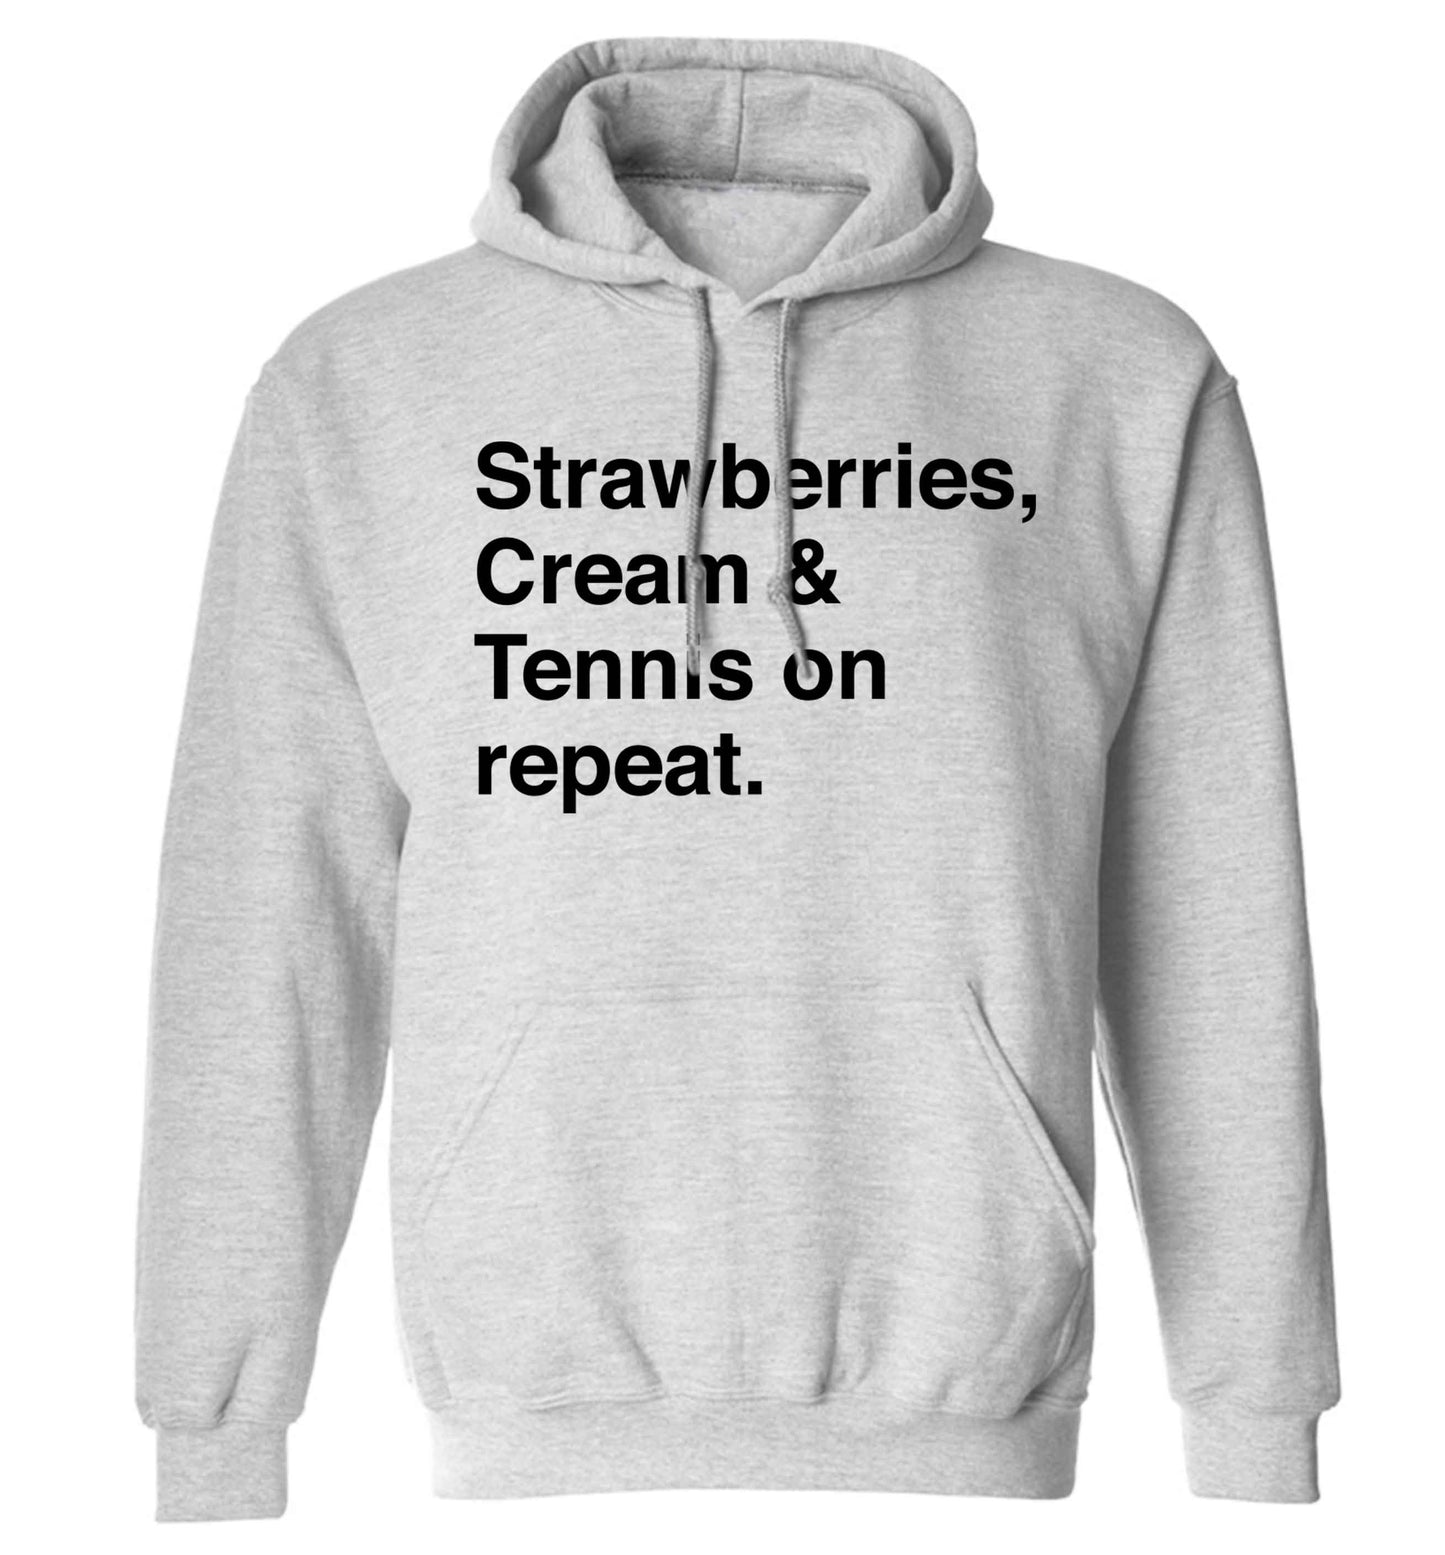 Strawberries, cream and tennis on repeat adults unisex grey hoodie 2XL